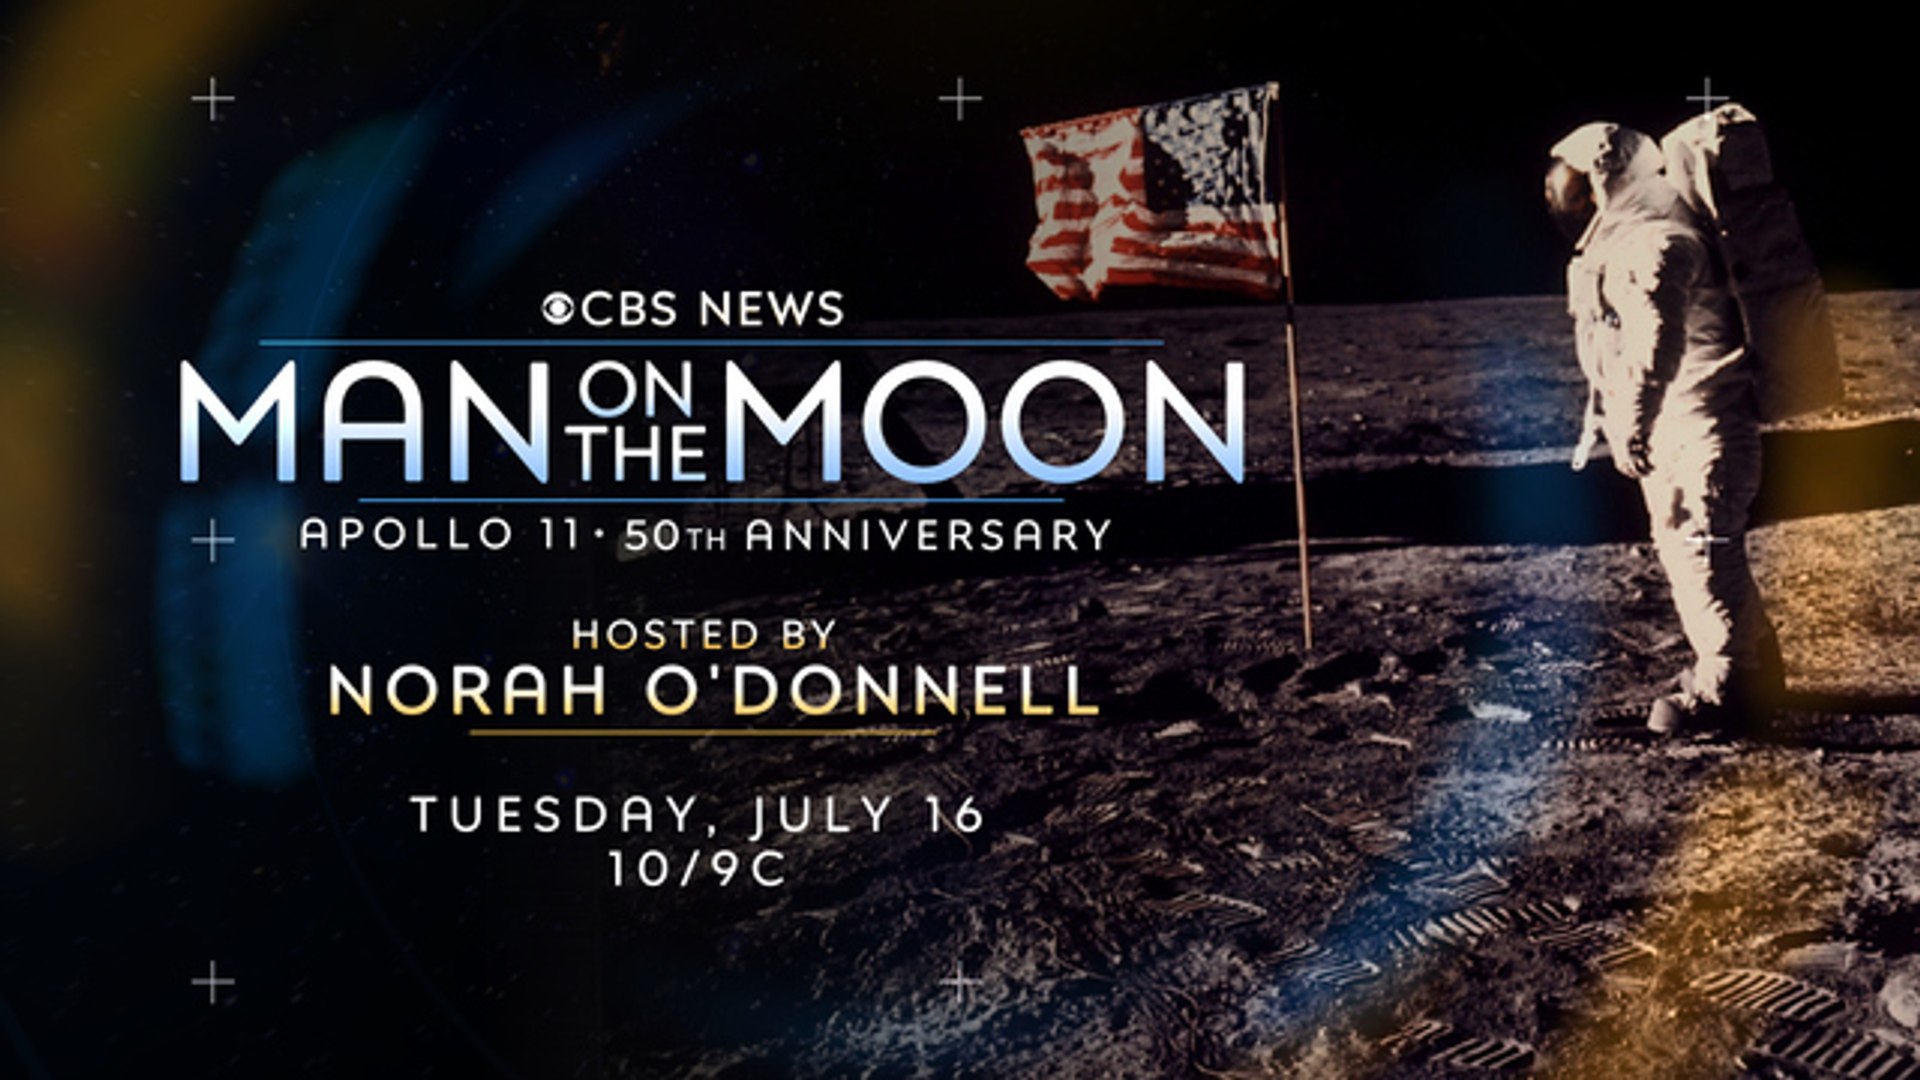 CBS News Presented A Live Stream Of The Apollo 11 Mission And Will Air A Special 50th Anniversary Event